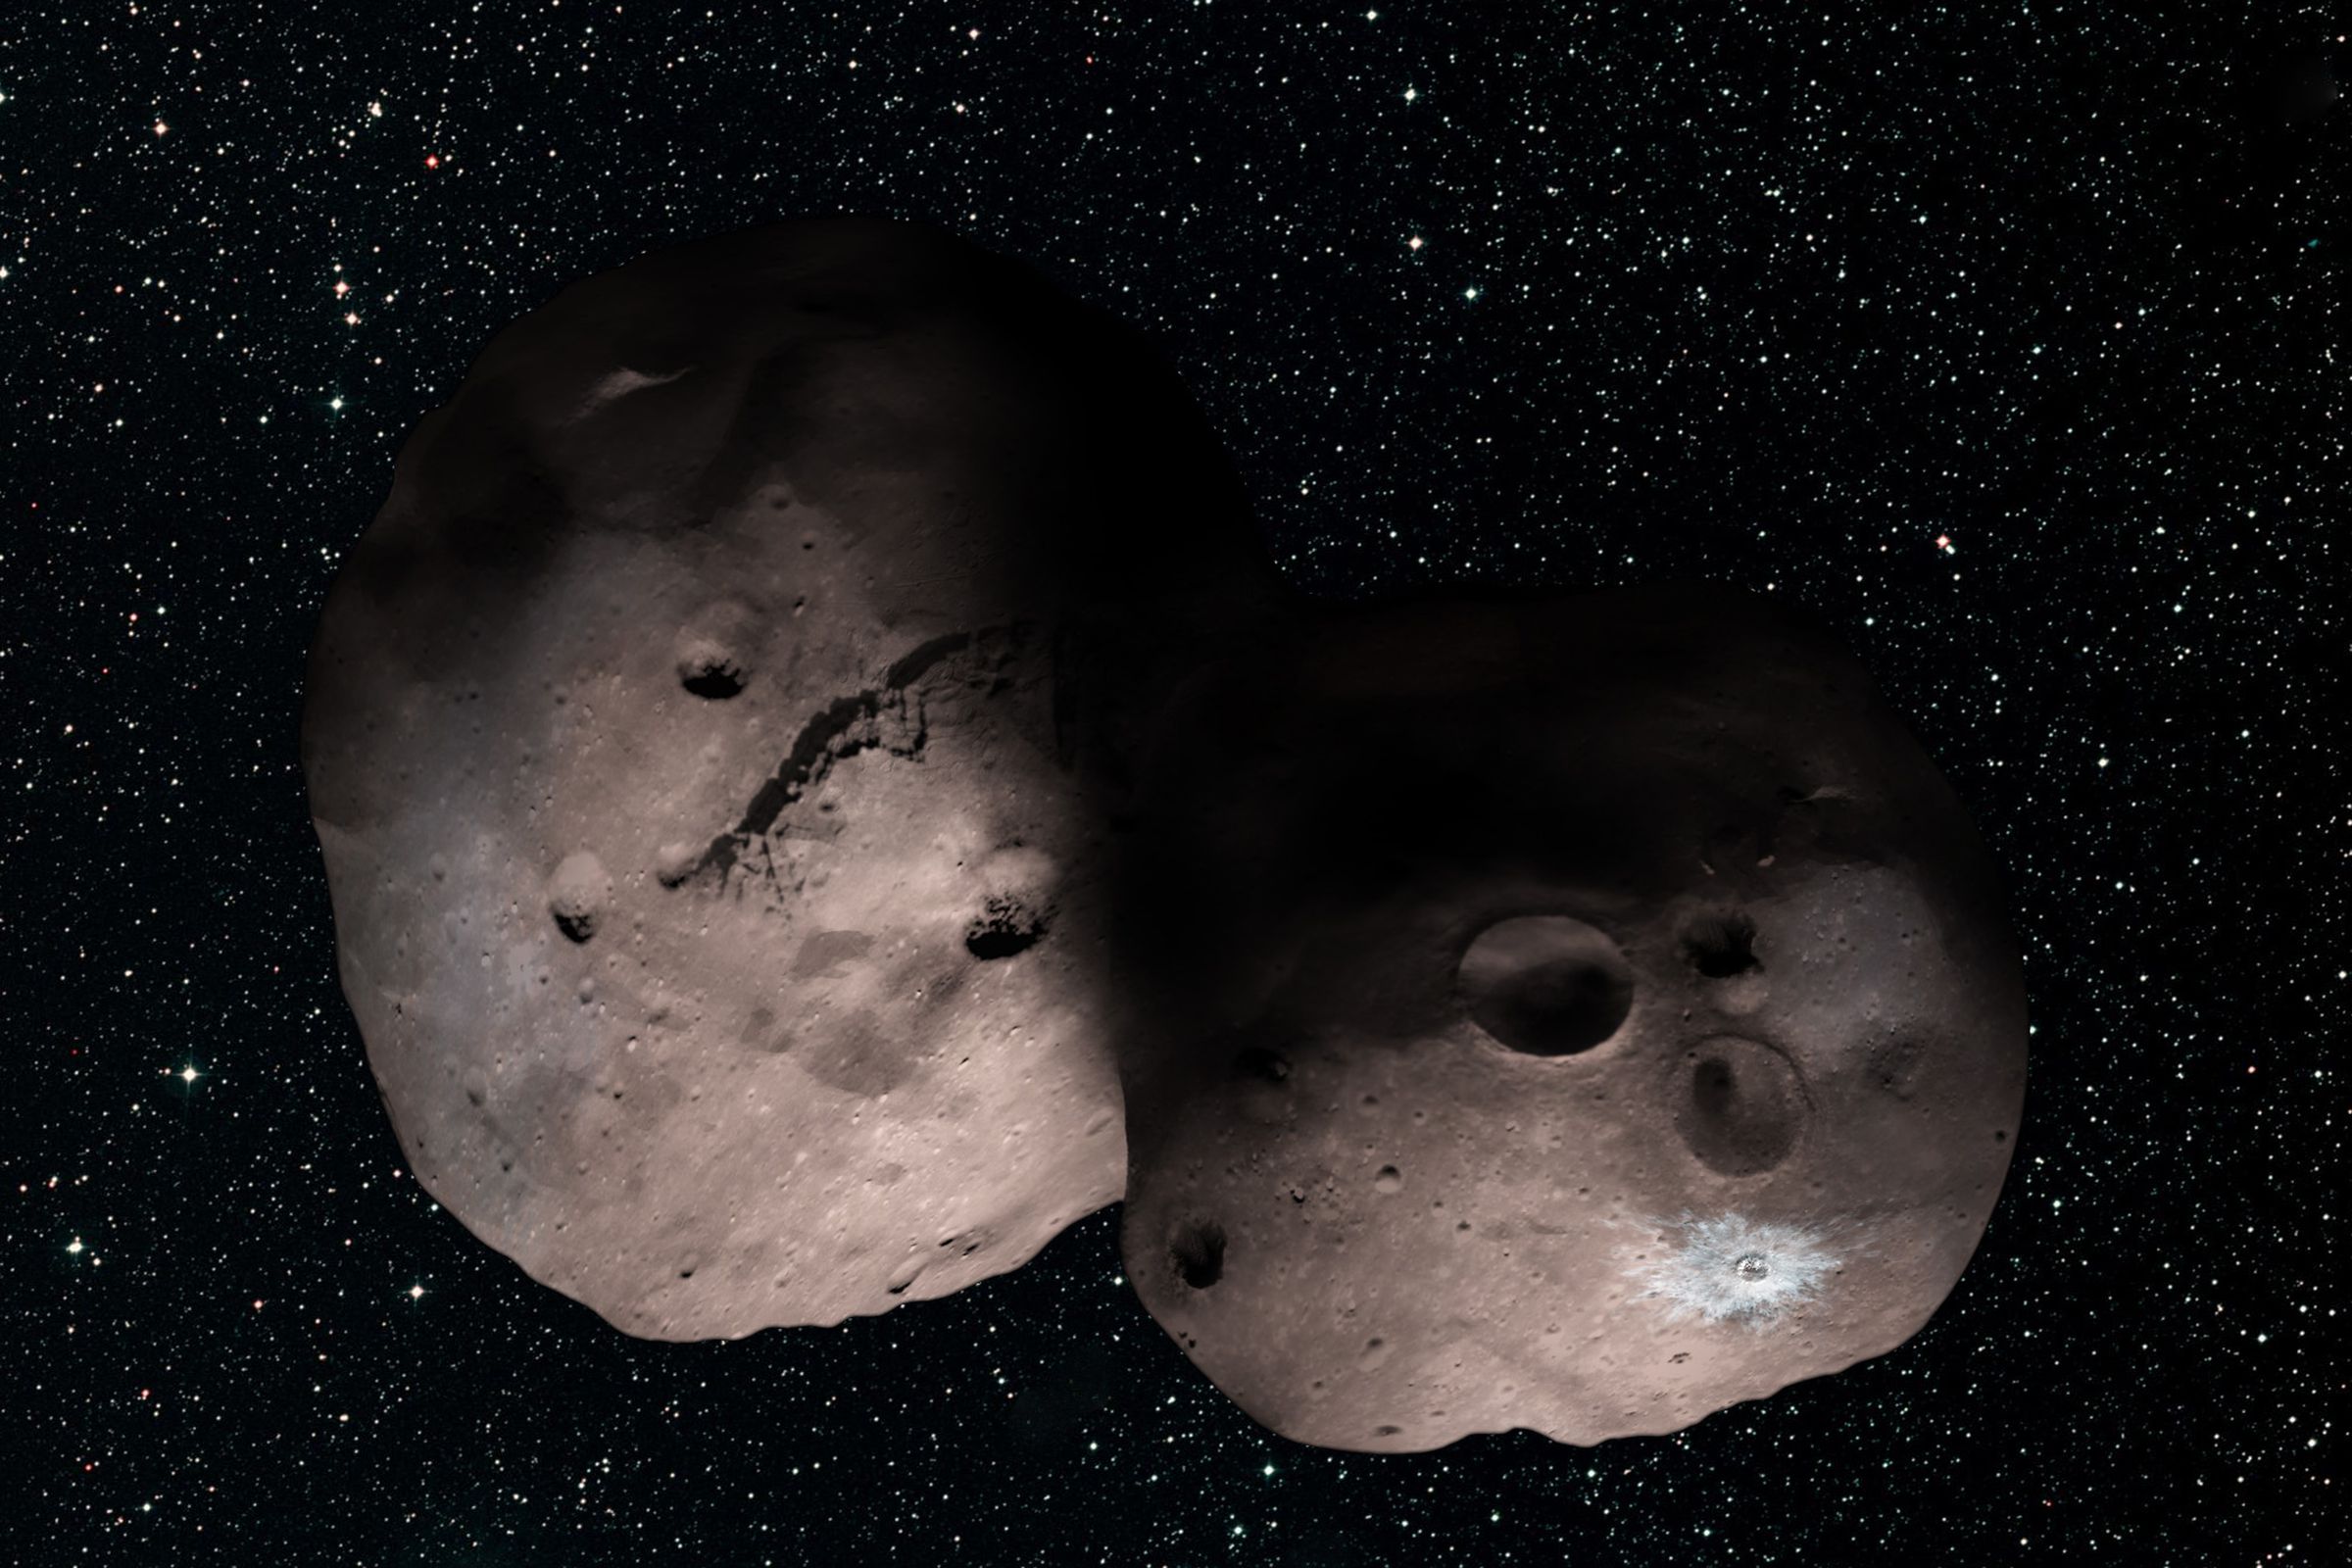 An artistic rendering of what MU69 could look like, based on telescope observations.